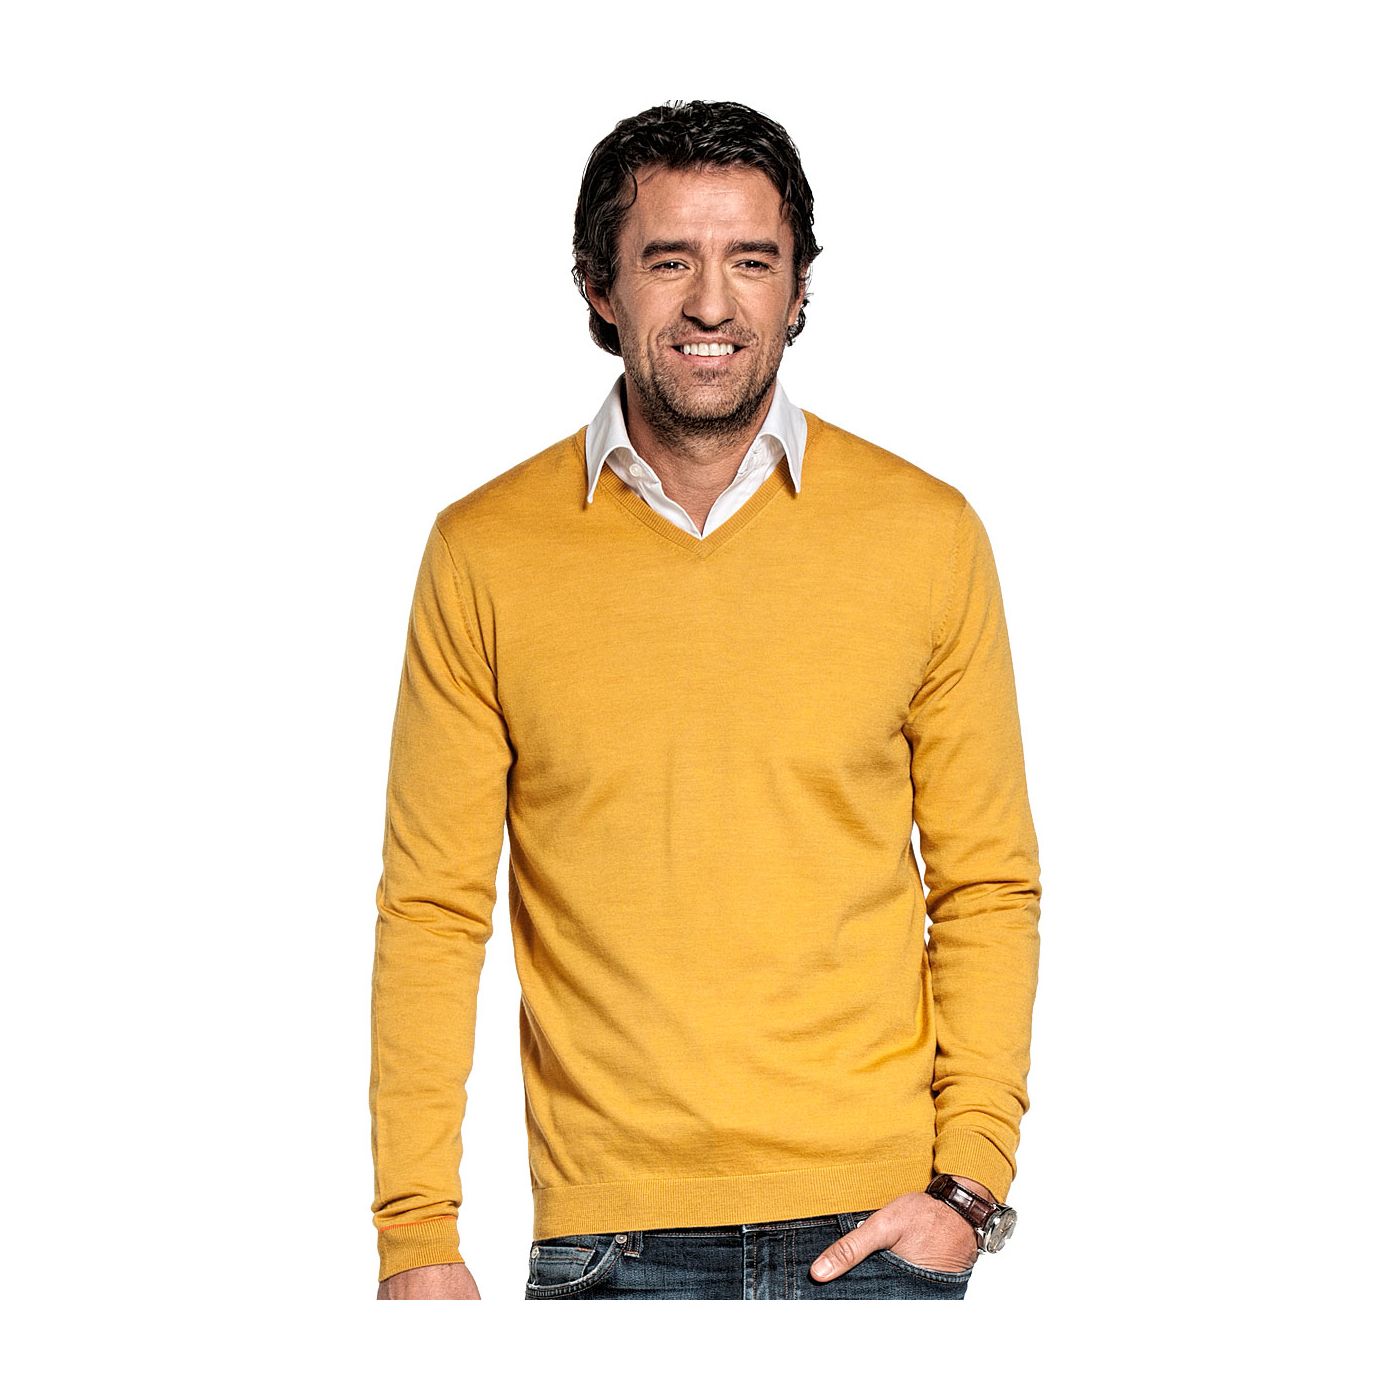 V-Neck sweater for men made of Merino wool in Yellow